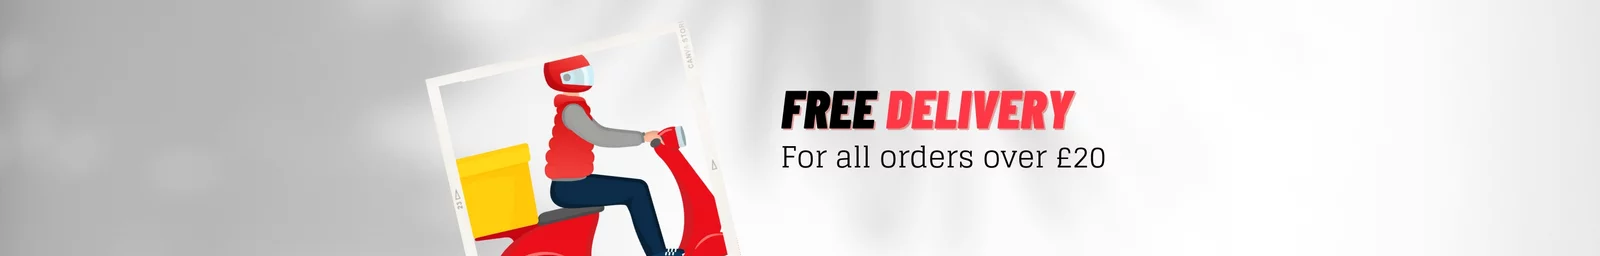 Free Delivery for all orders over 20